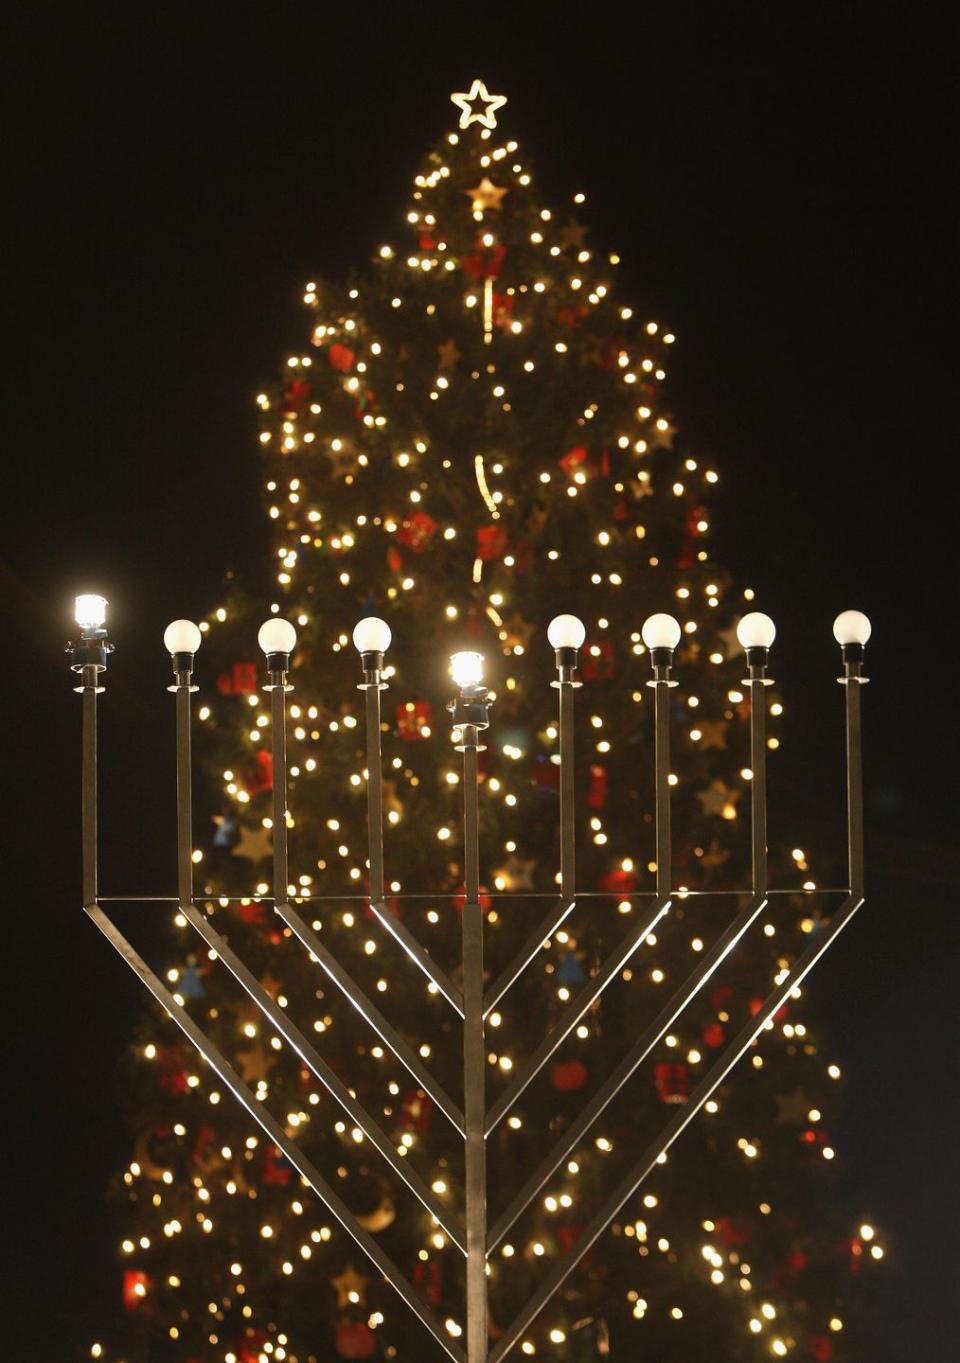 5) Hanukkah can align with other holidays.